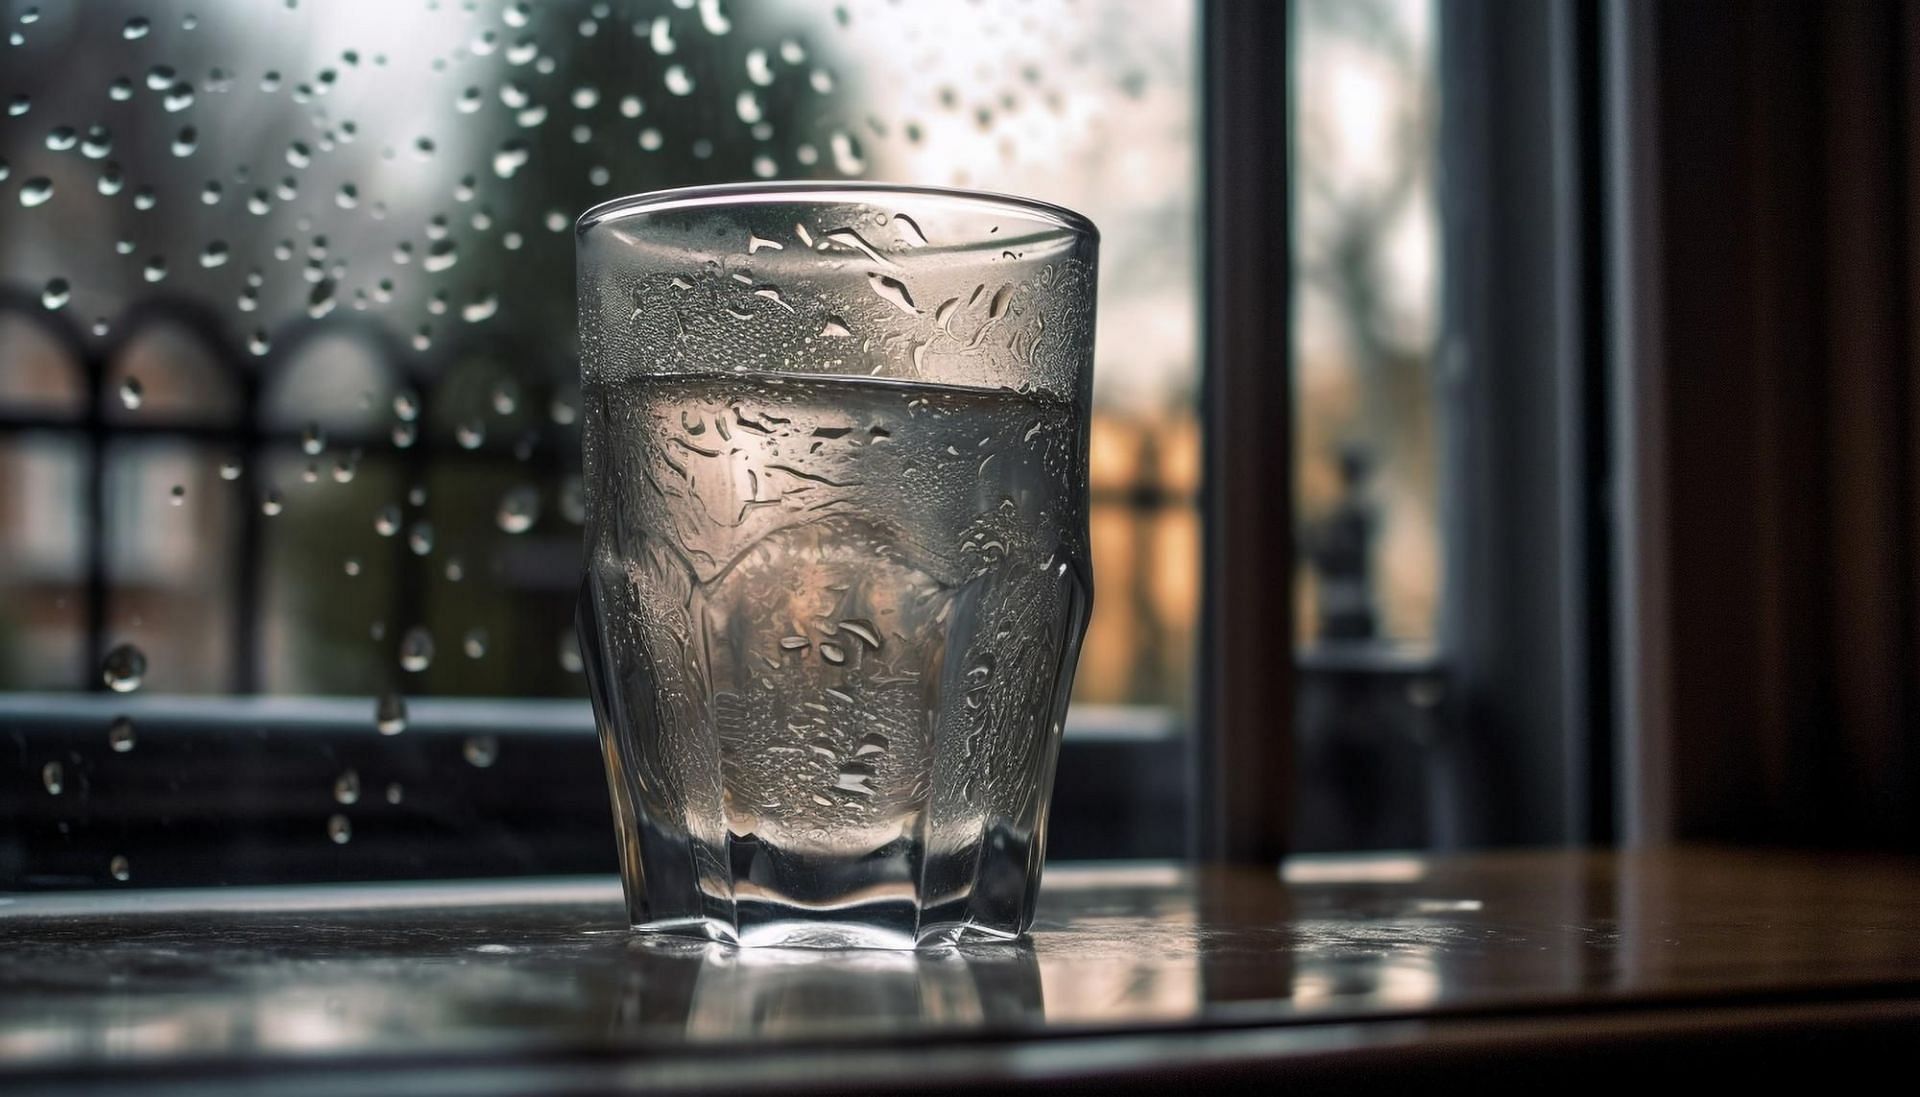 Drinking cold water can detox your body (Image by vecstock on Freepik)